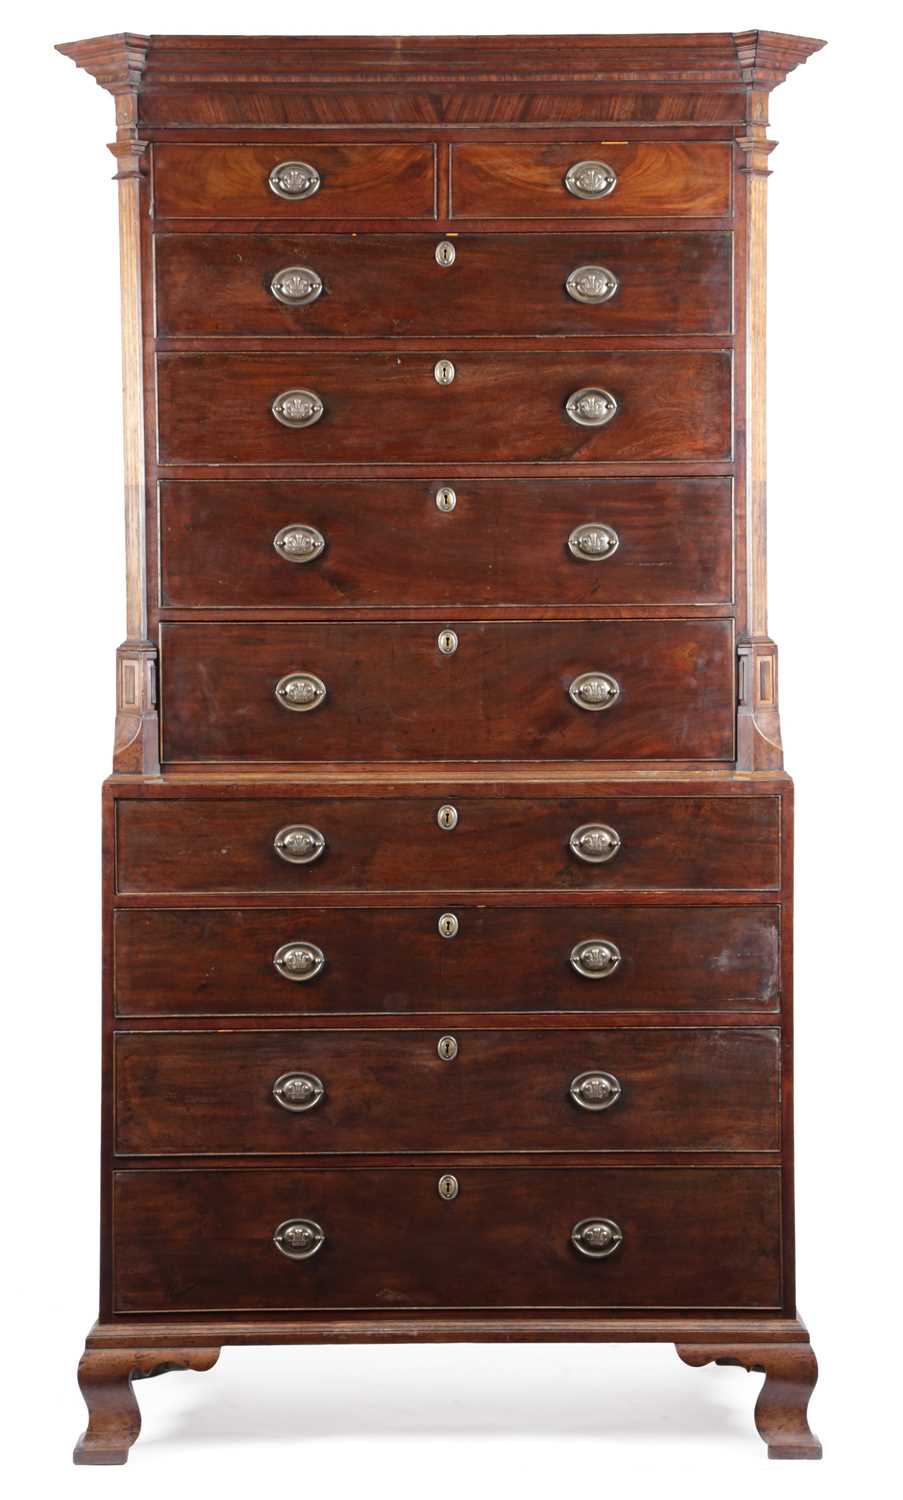 A GEORGE III MAHOGANY CHEST ON CHEST CHANNEL ISLANDS, LATE 18TH CENTURY inlaid with paterae and faux